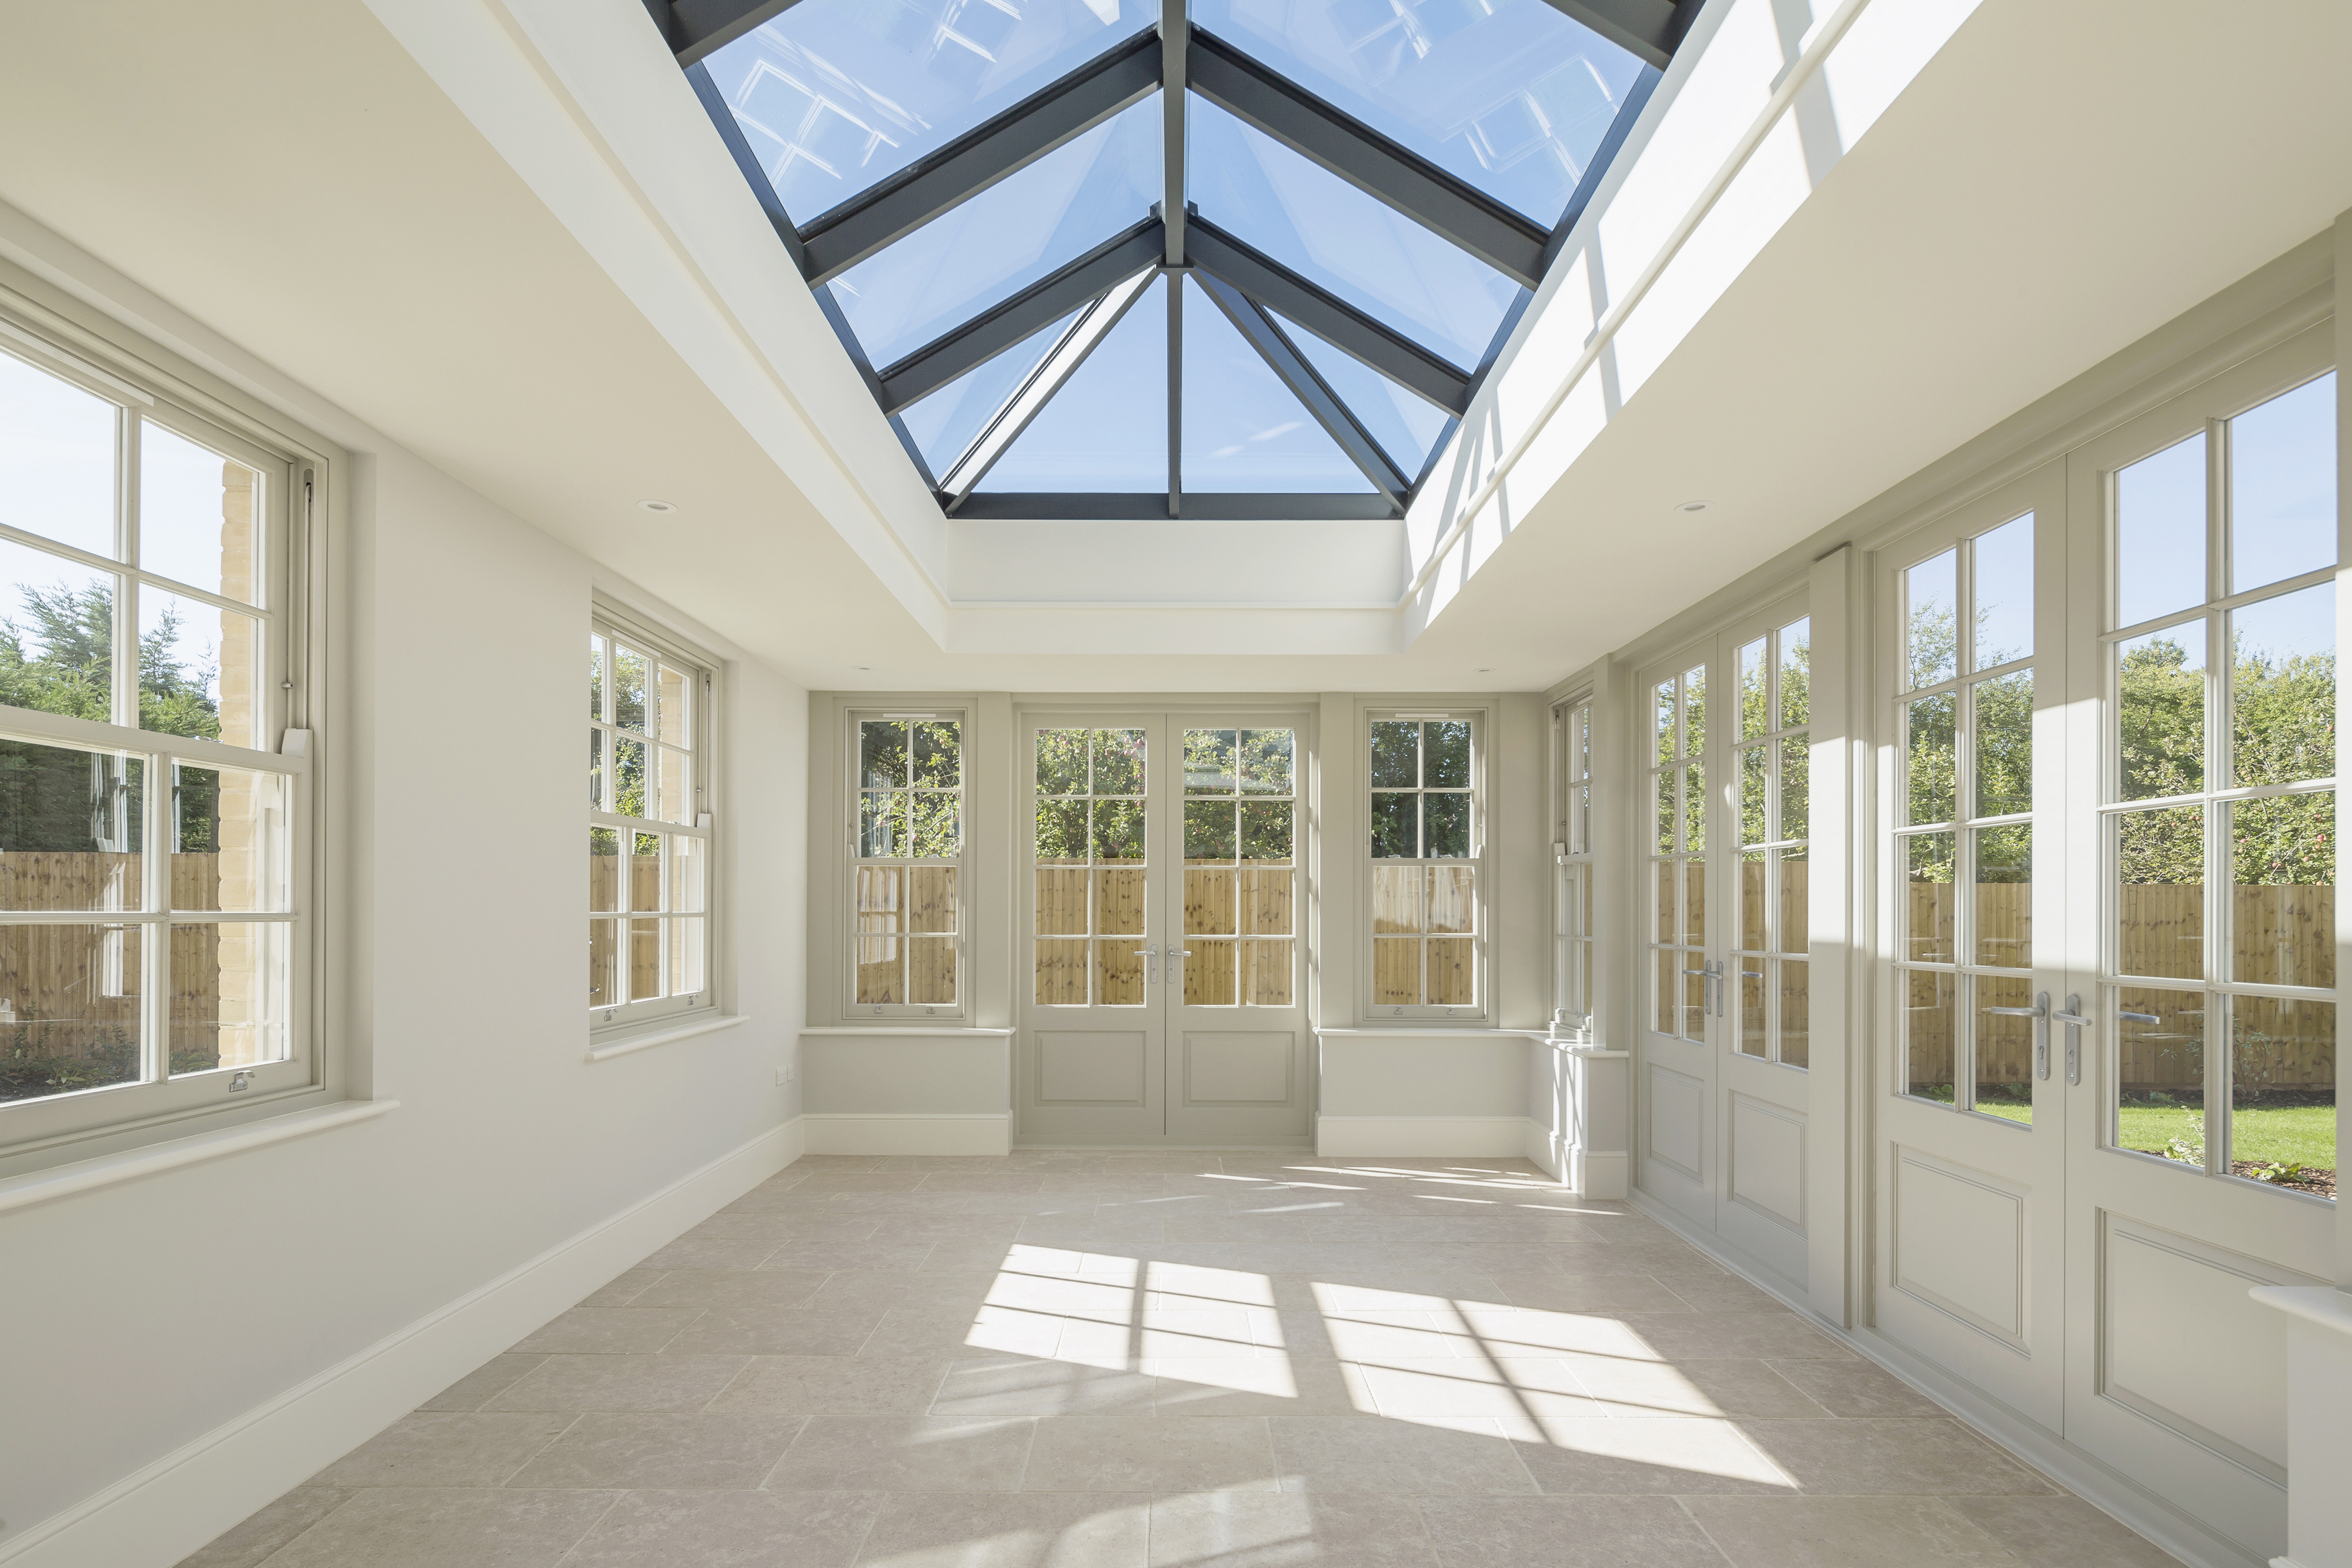 Skylights and French doors